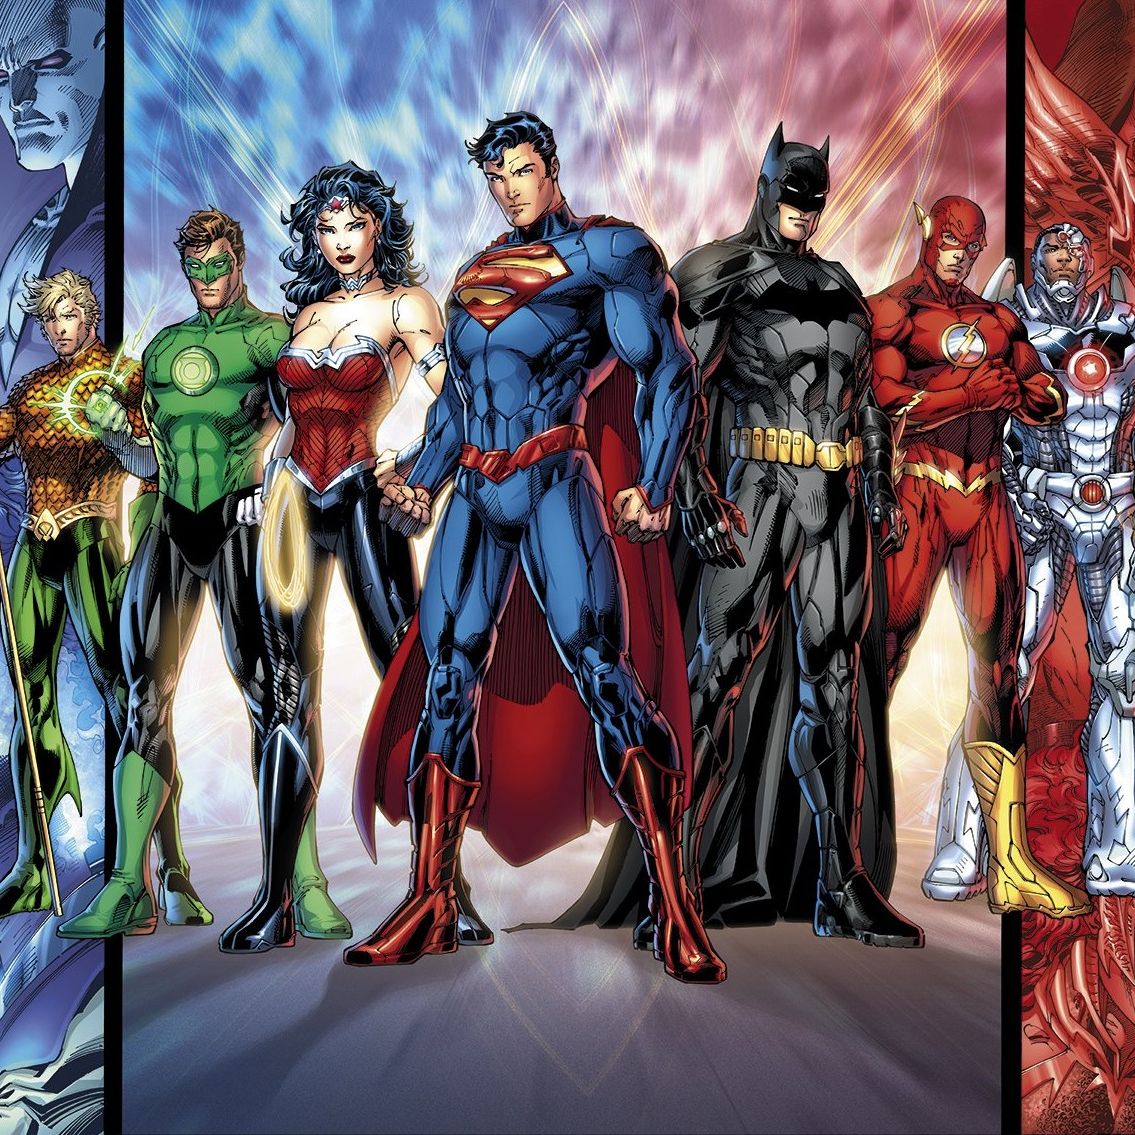 Justice League: All you need to know